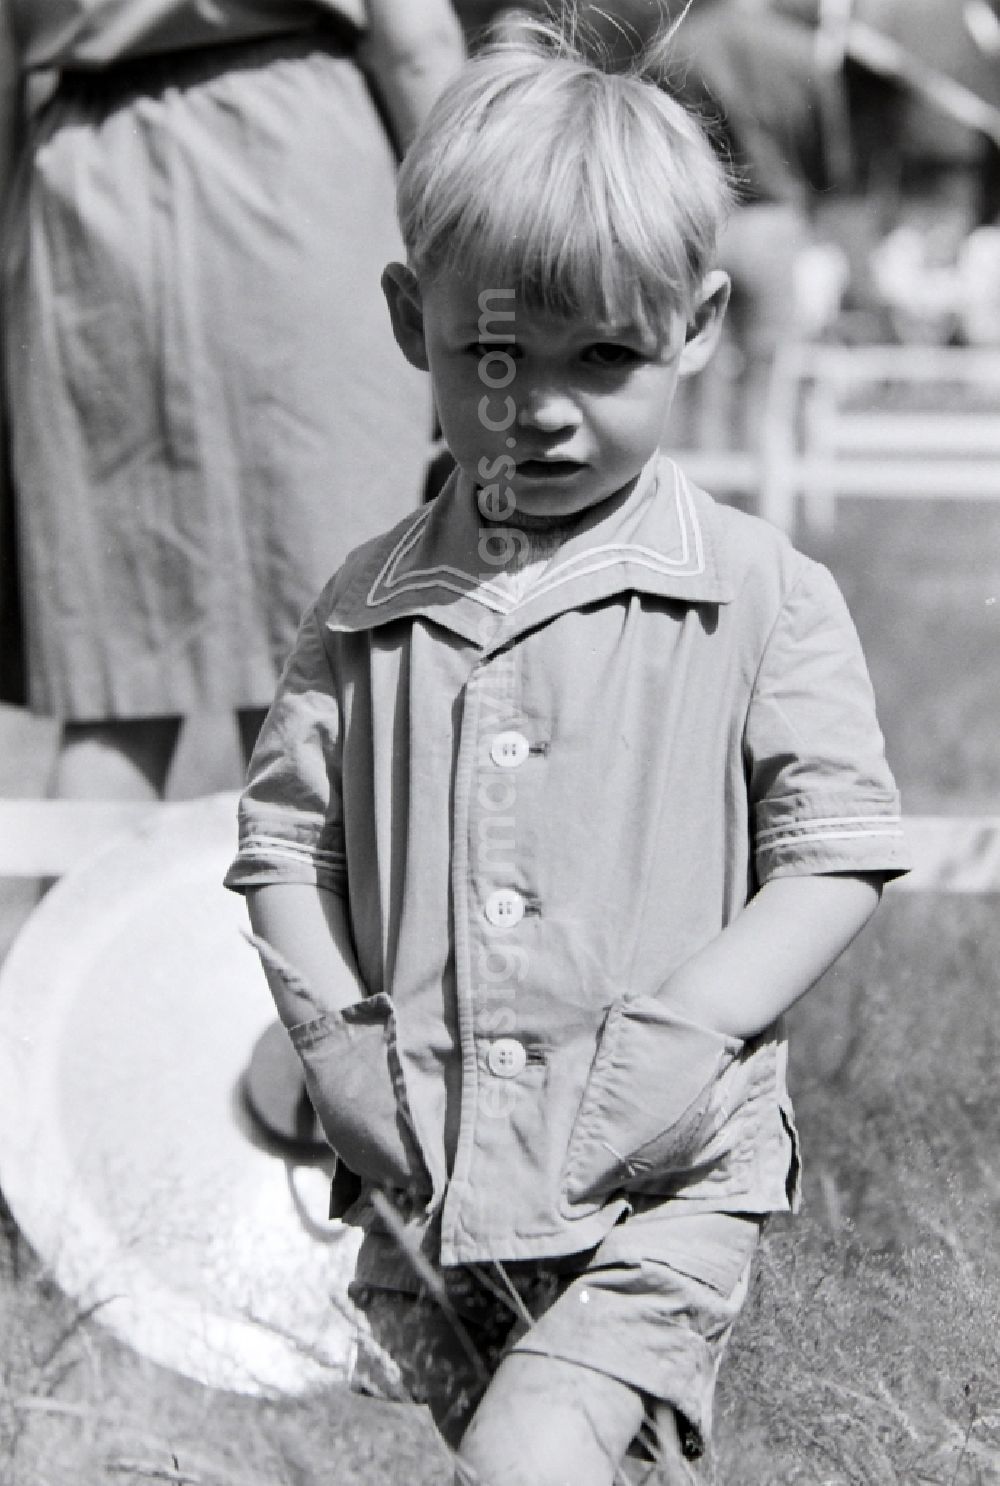 GDR picture archive: Prerow - Young boy interested in music at the summer camp Kim Ir Sen of the pioneer organization Ernst Thaelmann in Prerow in the state of Mecklenburg-Western Pomerania in the area of the former GDR, German Democratic Republic